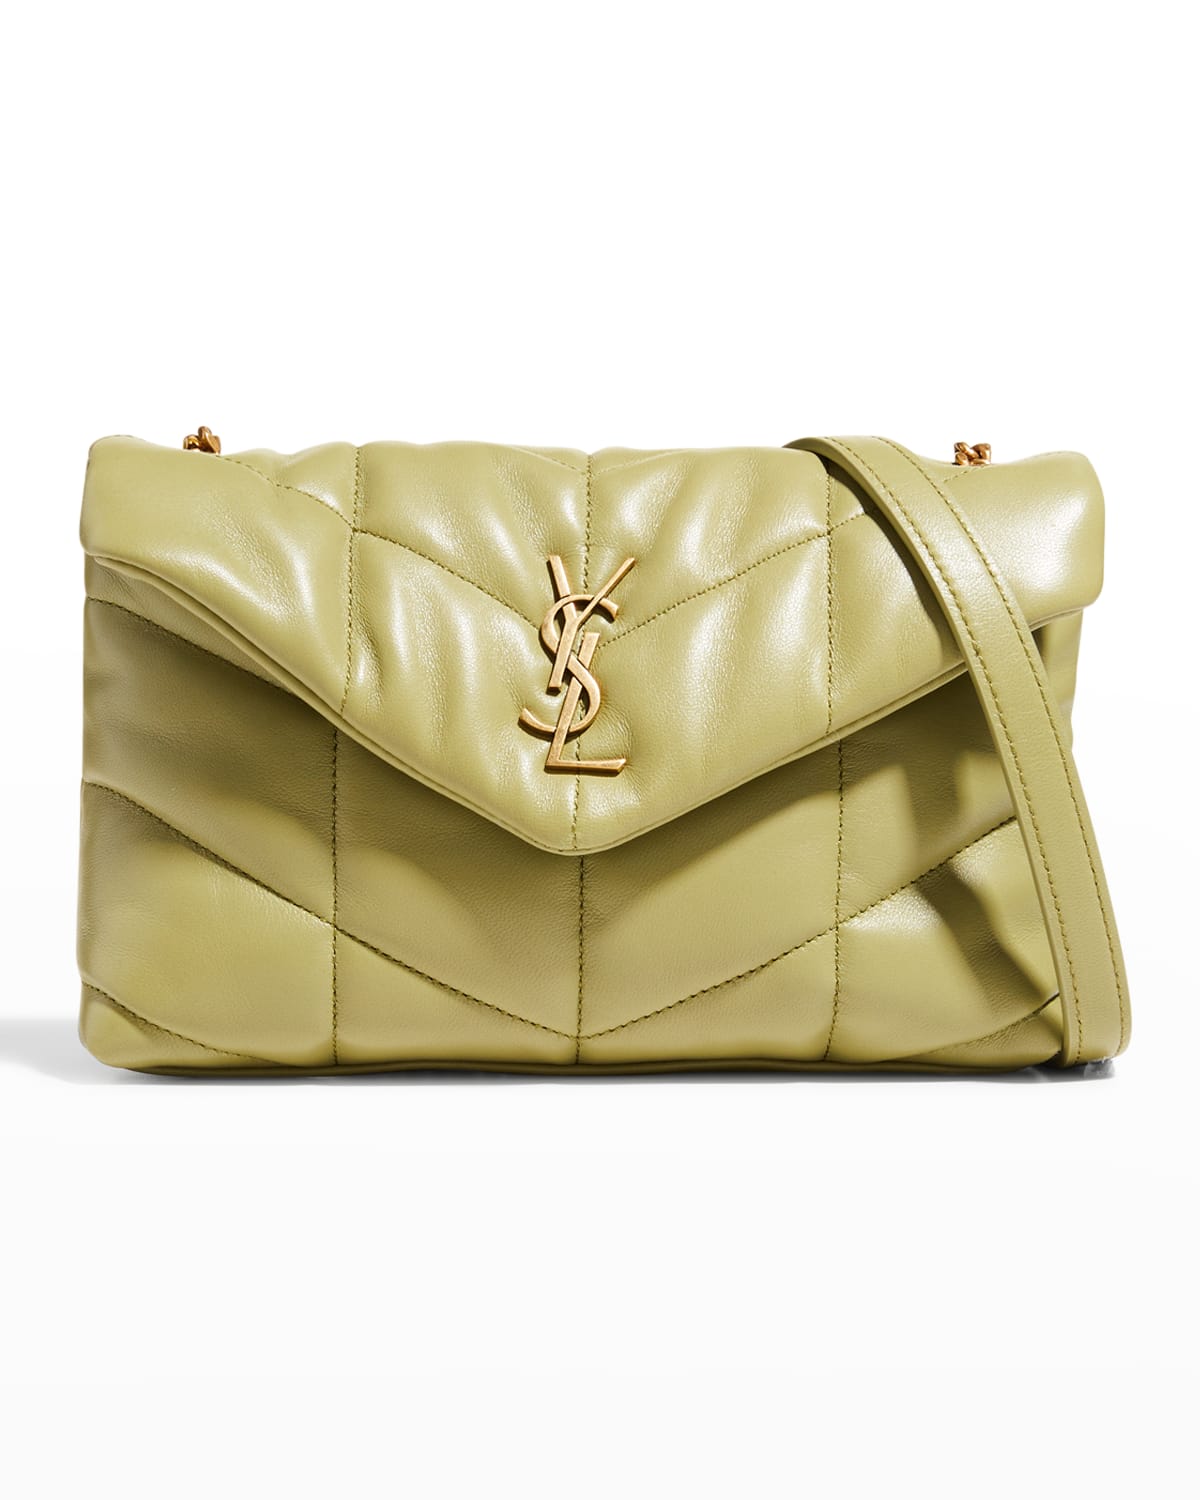 Saint Laurent Loulou Quilted Leather YSL Bag | Neiman Marcus